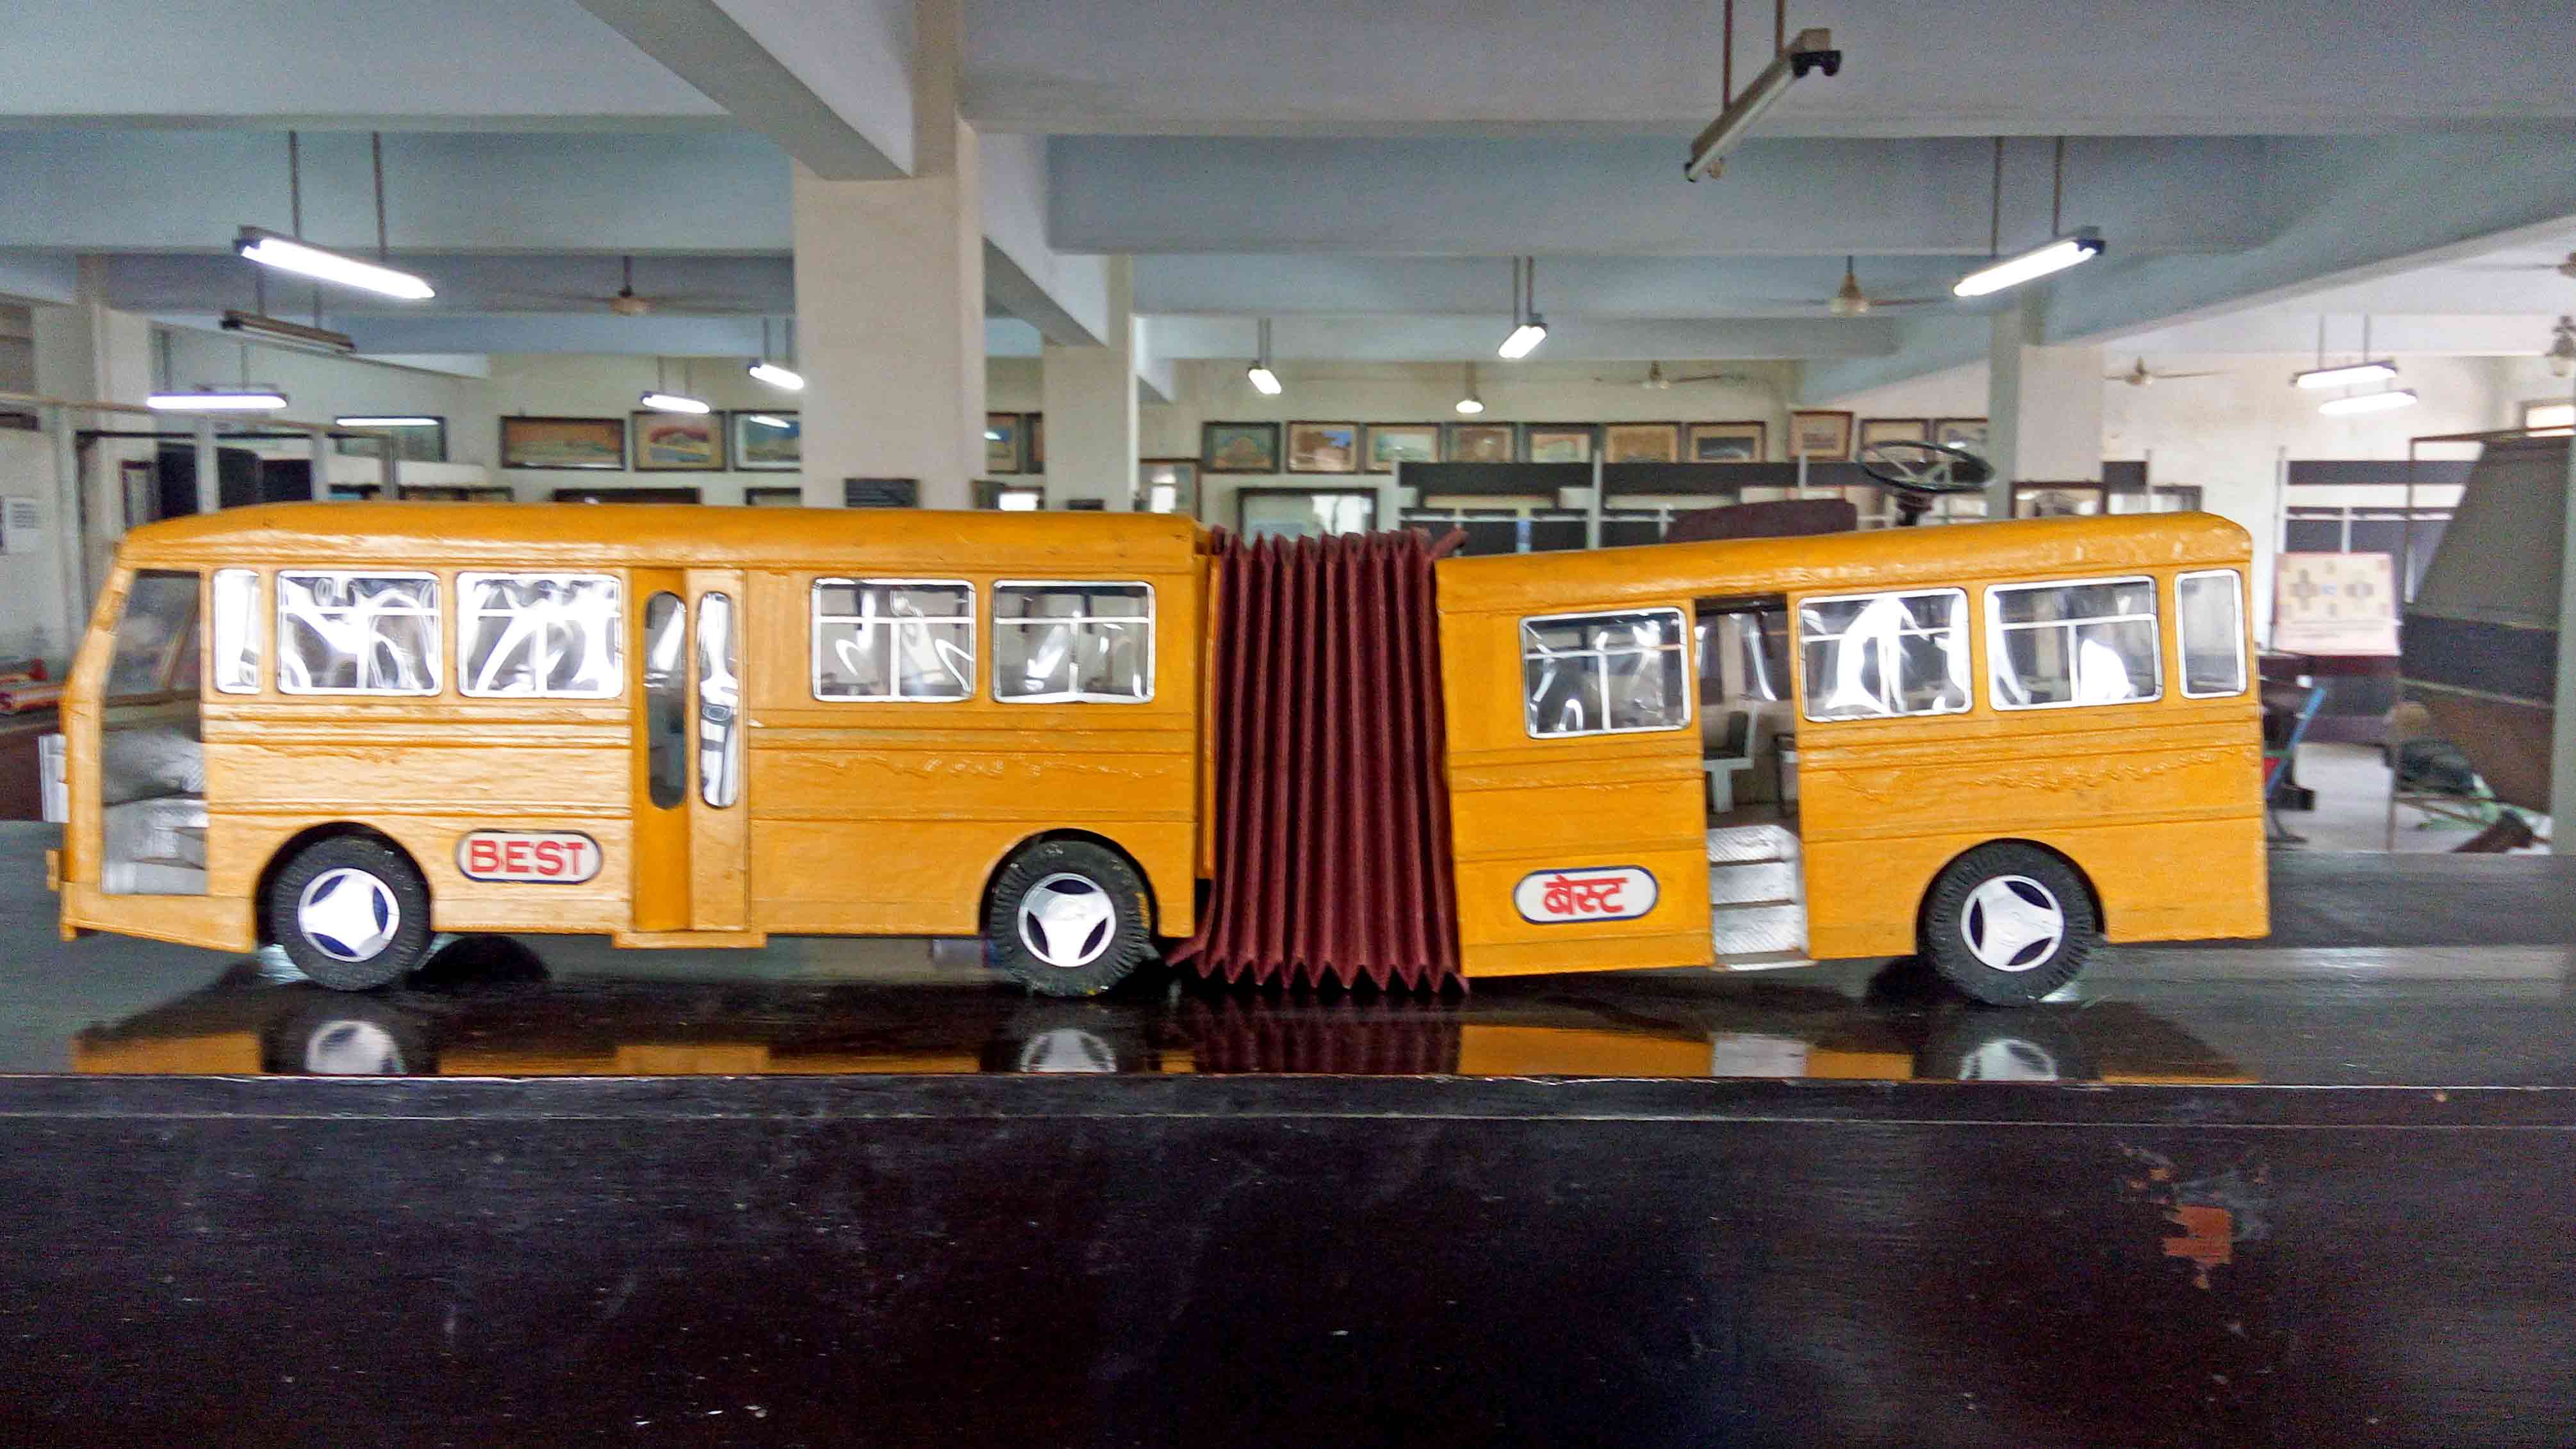 Miniature model of the BEST bus 